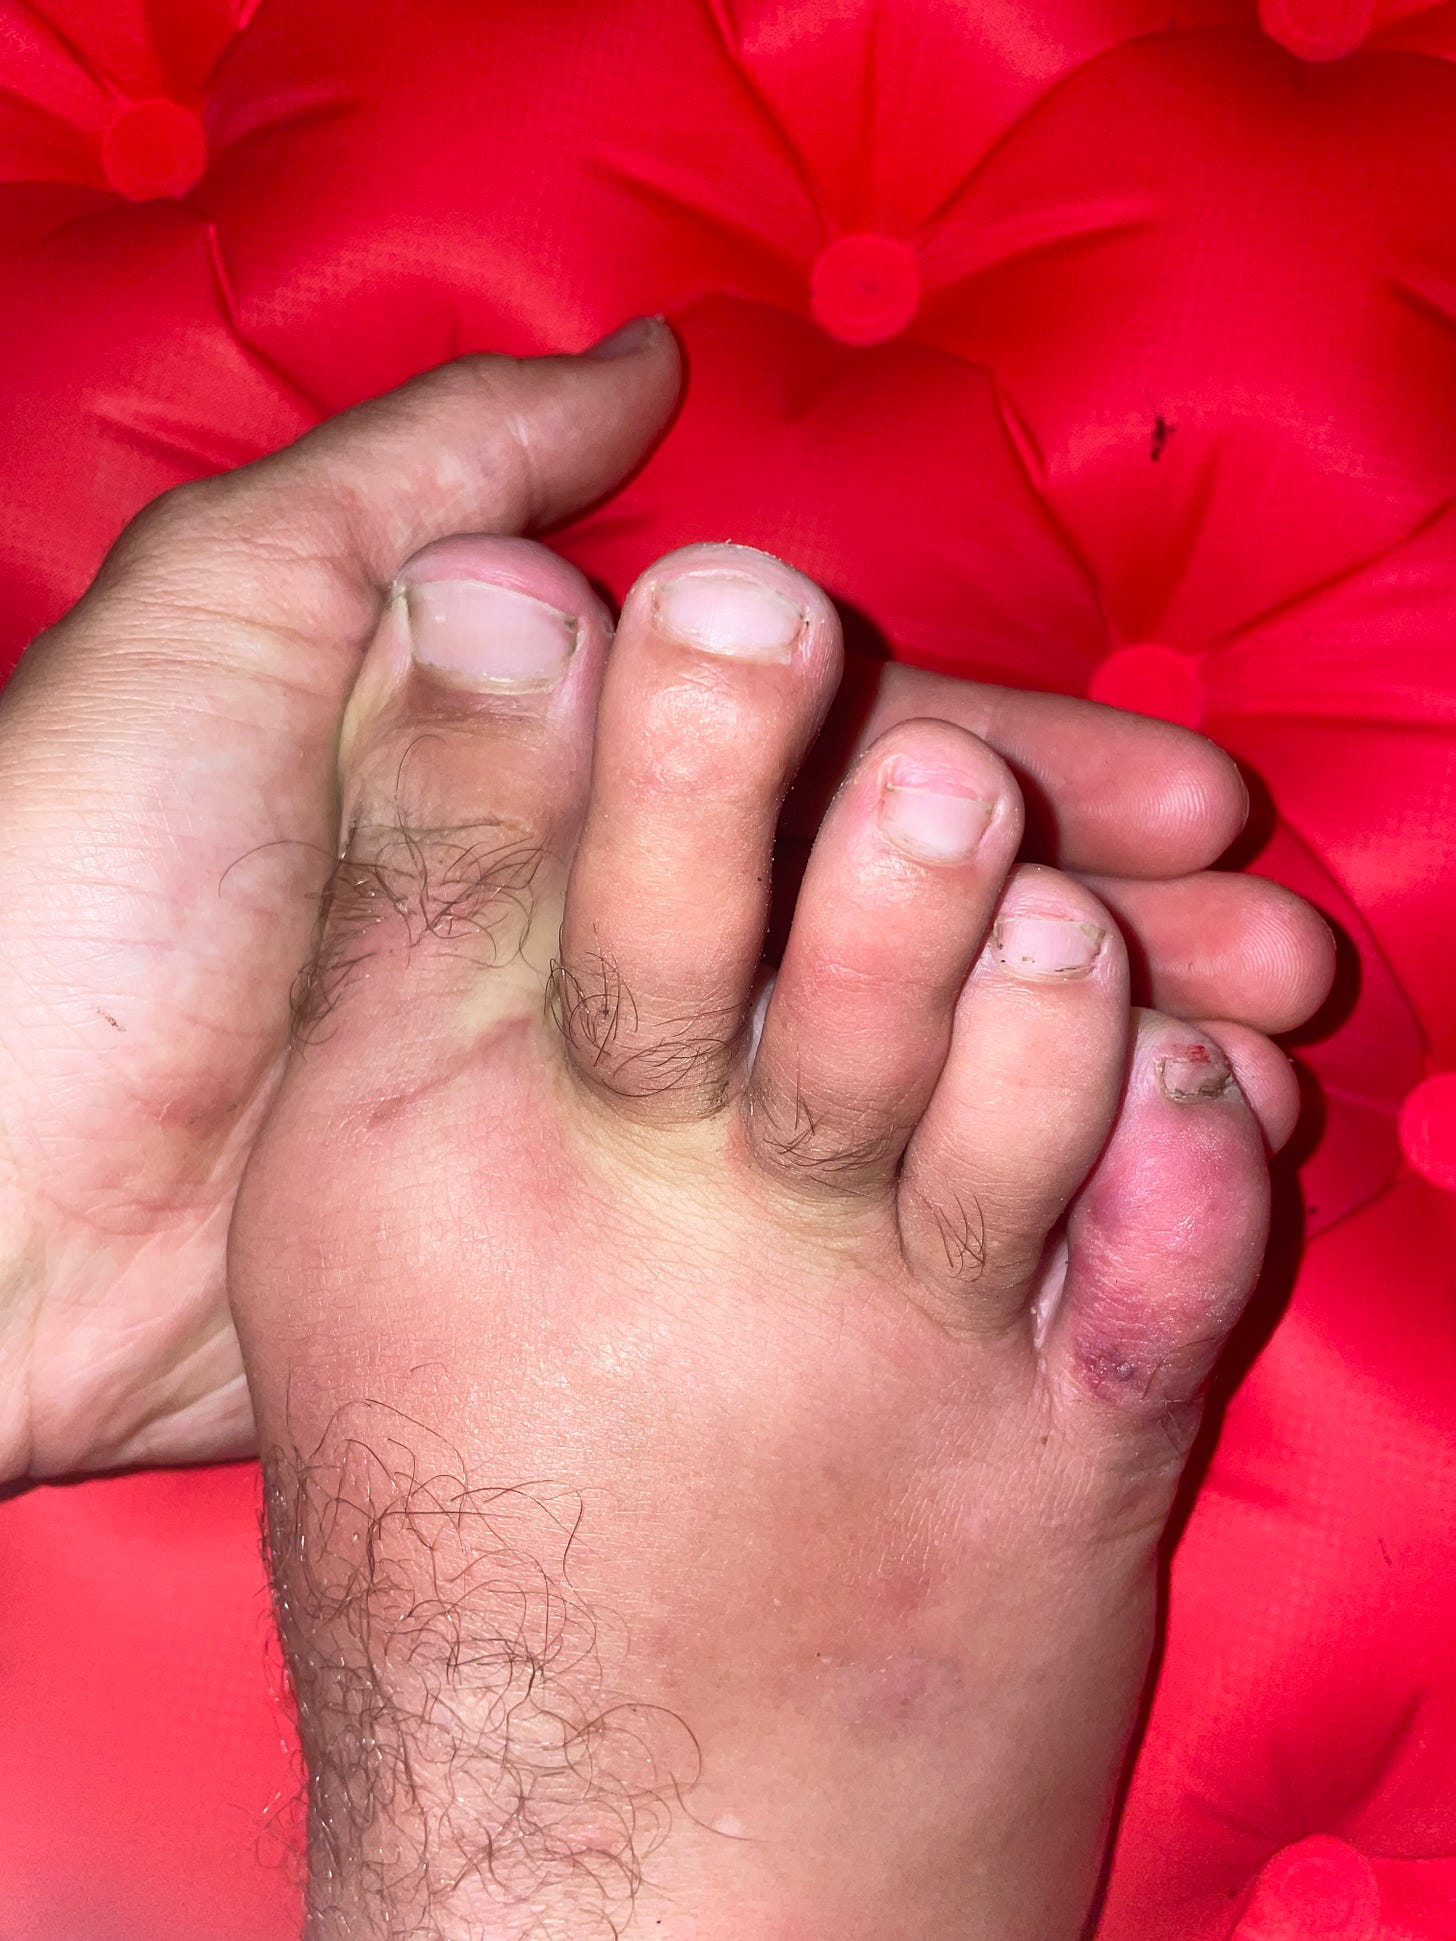 Colton’s swollen foot with spider bite on his baby toe